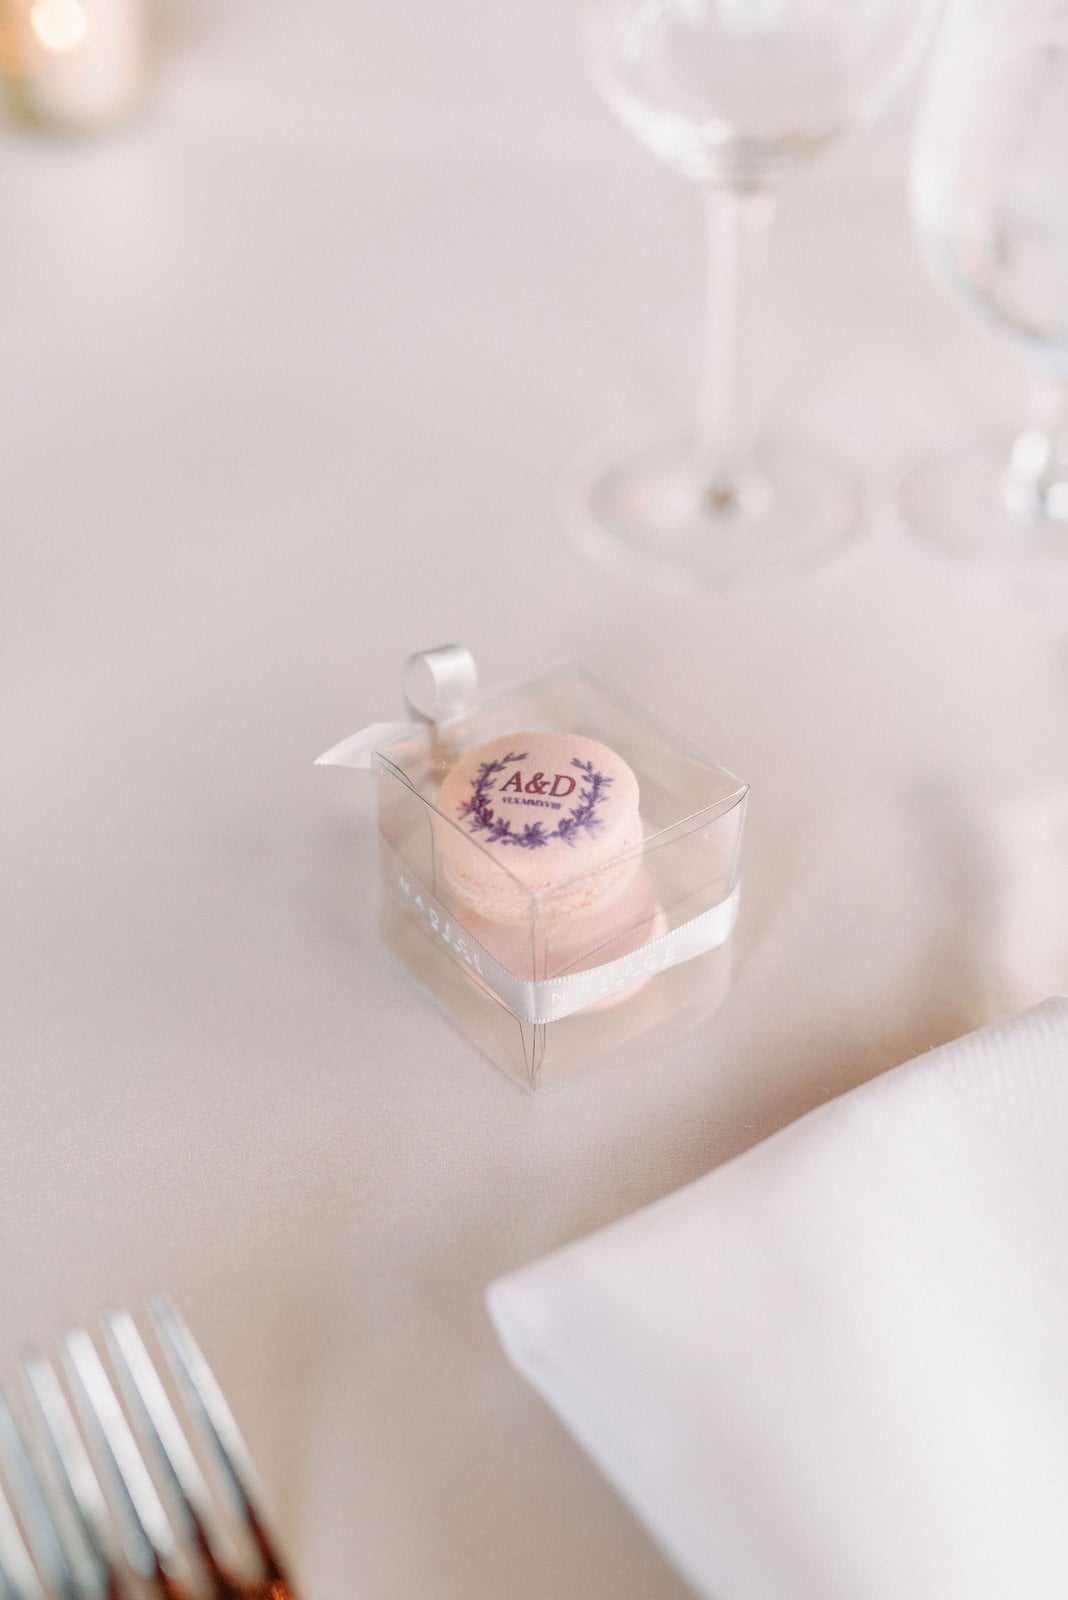 custom macarons guest favours exquisite modern romantic featured by martha stewart weddings steam whistle wedding toronto wedding venue jacqueline james photography